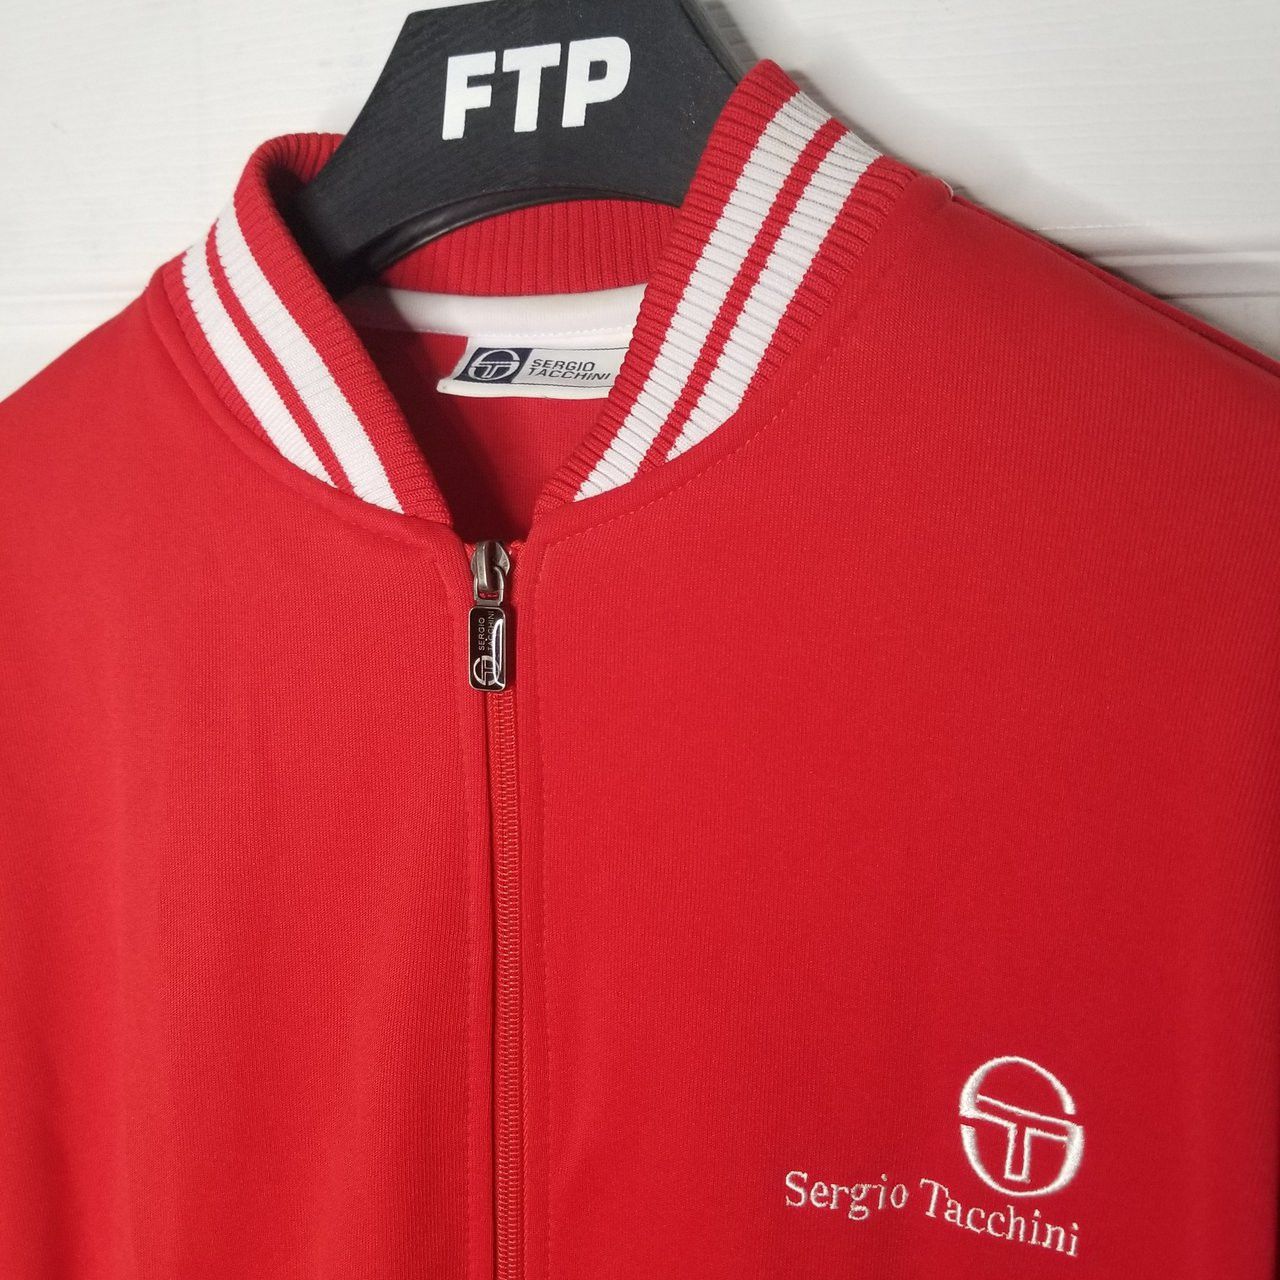 Vintage VTG Sergio Tacchini Embroidered Logo Zip Up Track Jacket Size US S / EU 44-46 / 1 - 2 Preview